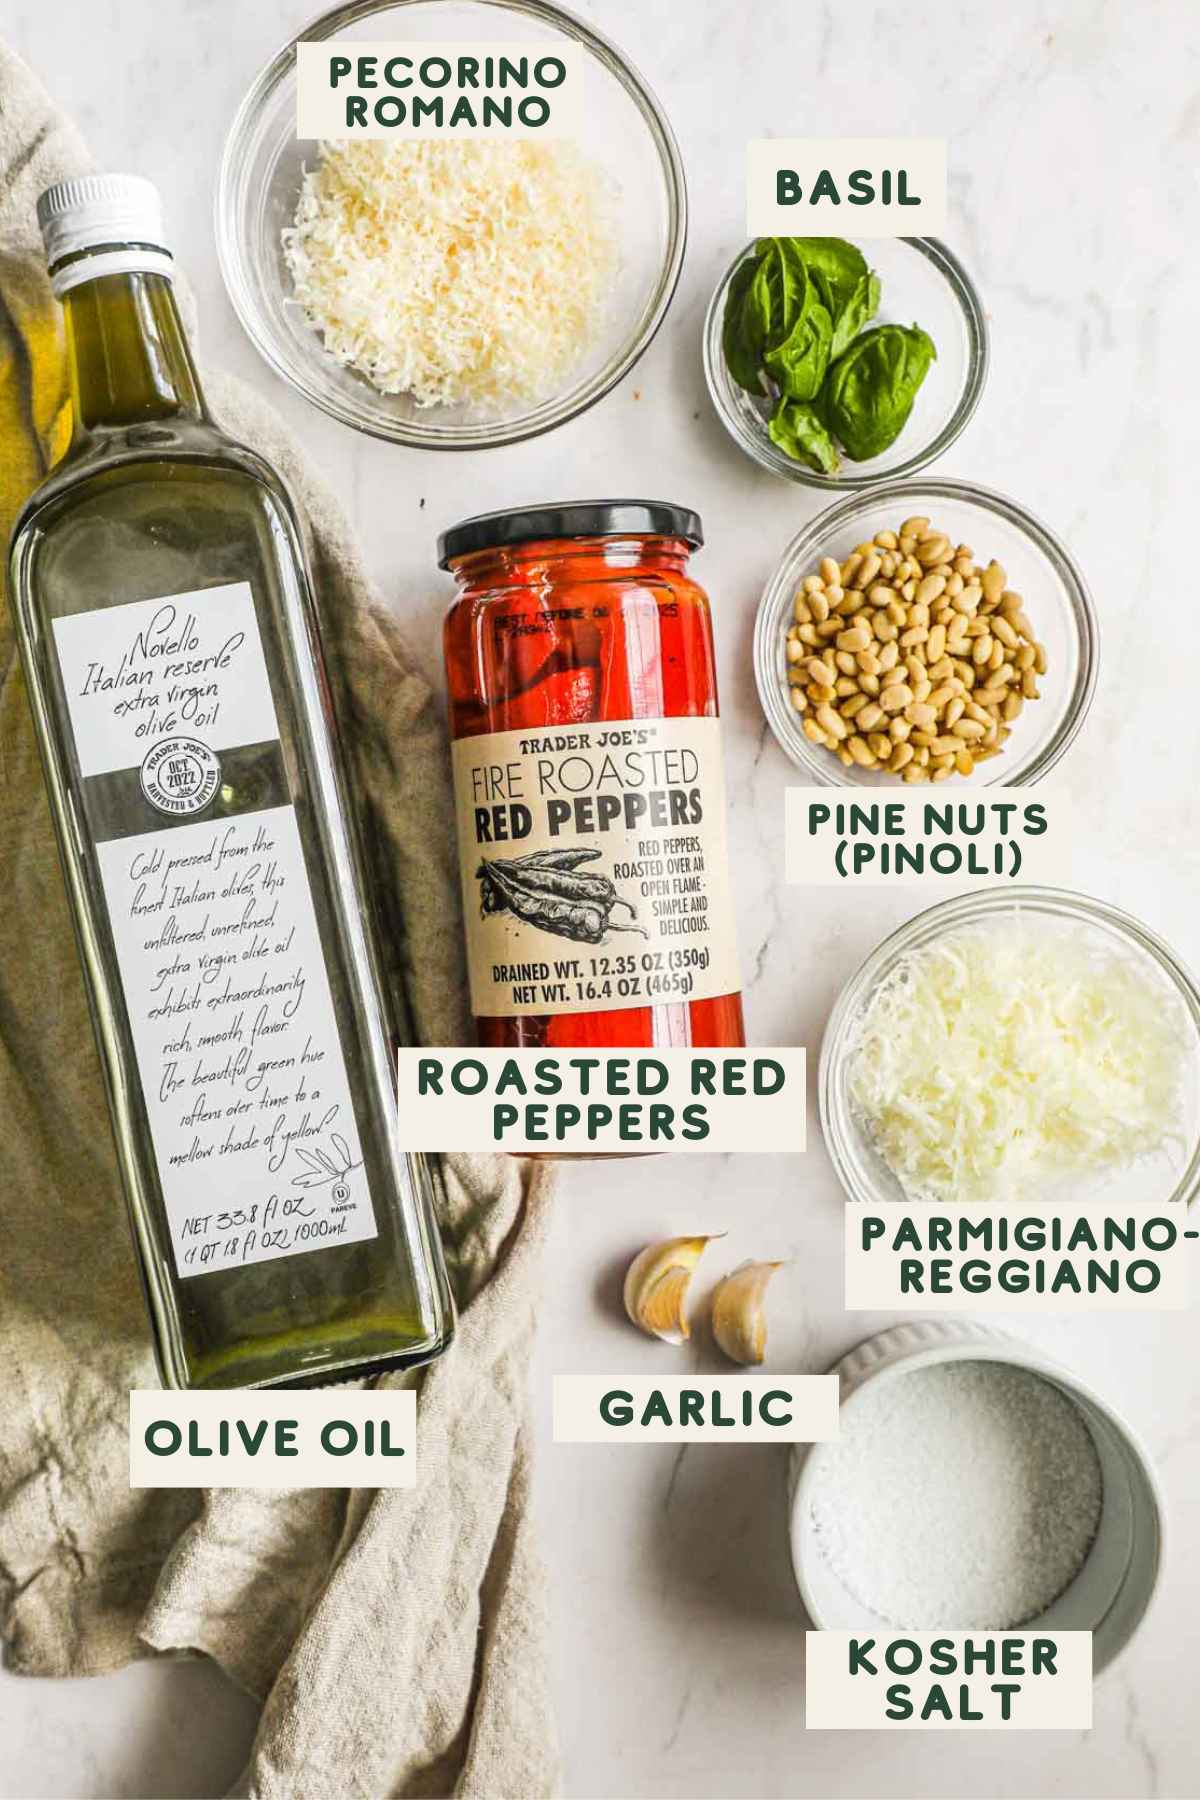 Ingredients to make roasted red pepper pesto pasta, including roasted red peppers, pecorino romano, parmigiano-reggiano, olive oil, basil, pine nuts, and kosher salt.